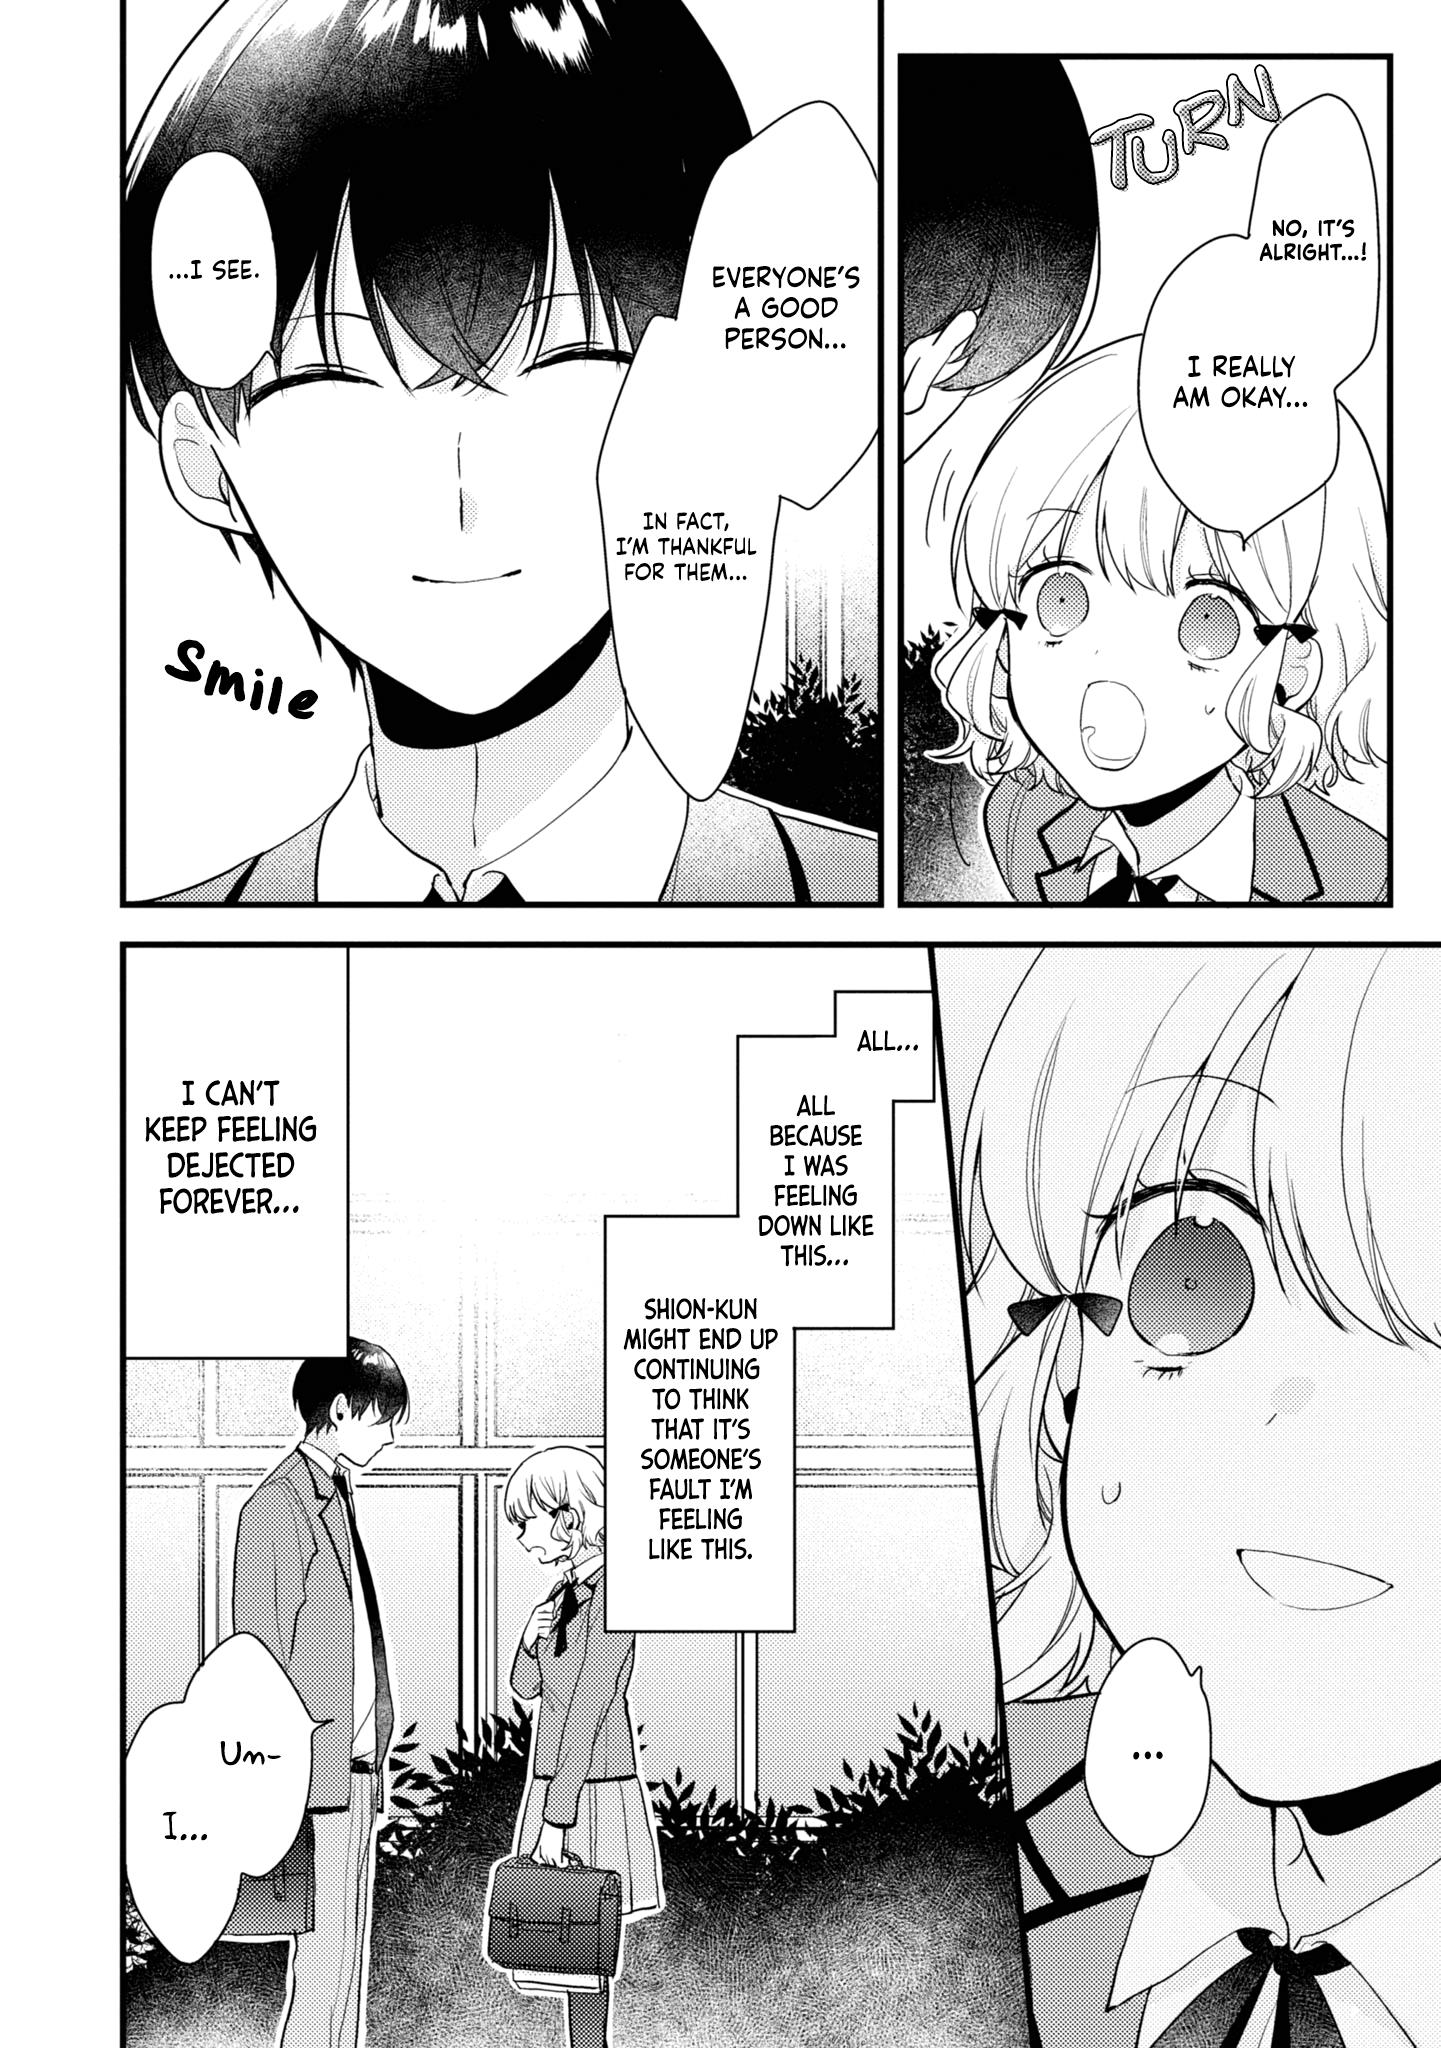 I Have A Second Chance At Life, So I’Ll Pamper My Yandere Boyfriend For A Happy Ending!! Chapter 5 #23